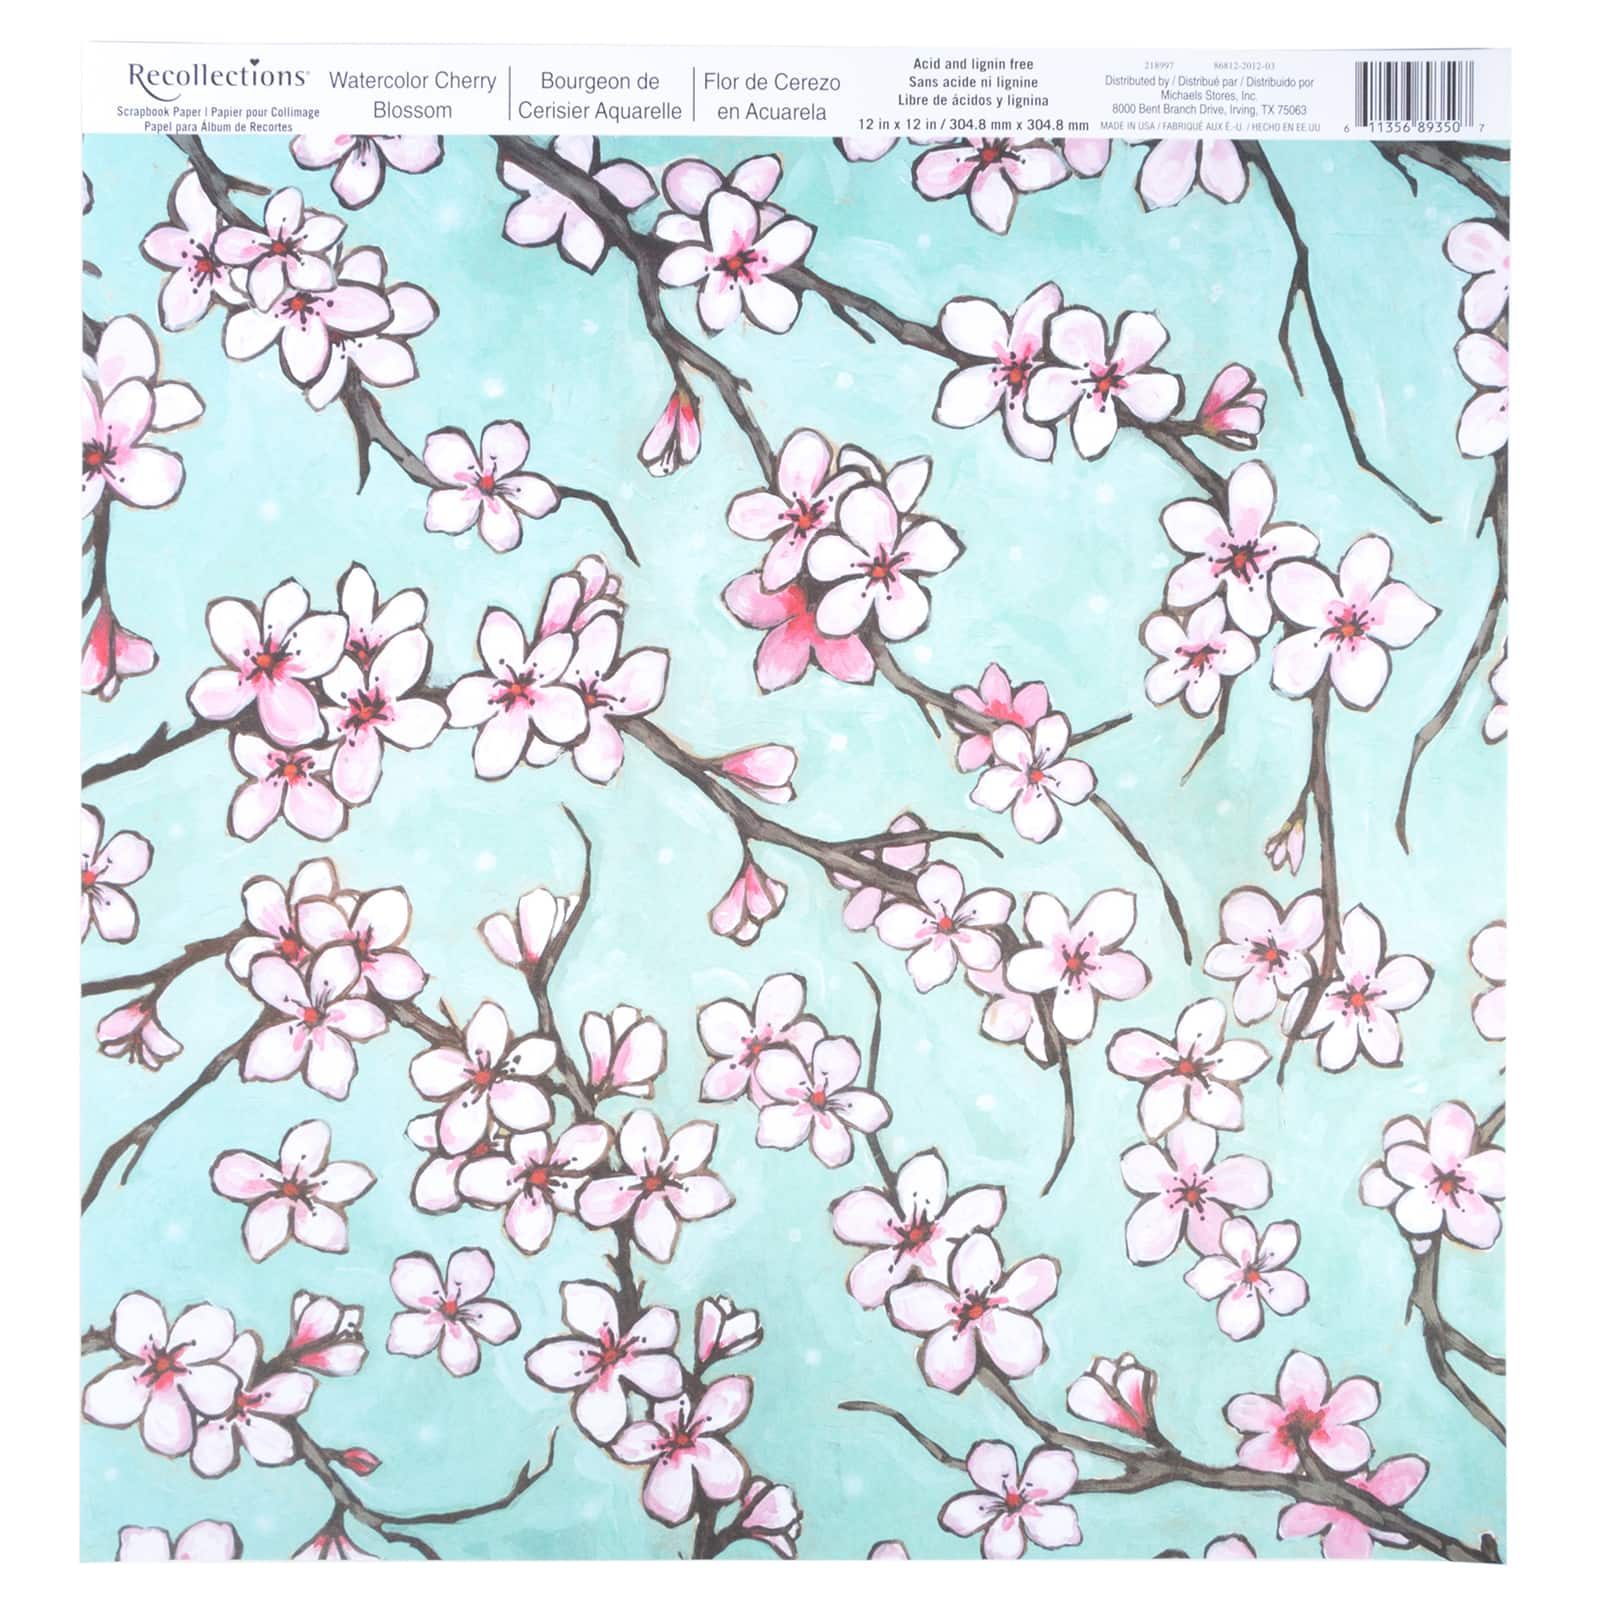 Shop For The Watercolor Cherry Blossom Scrapbook Paper By Recollections At Michaels